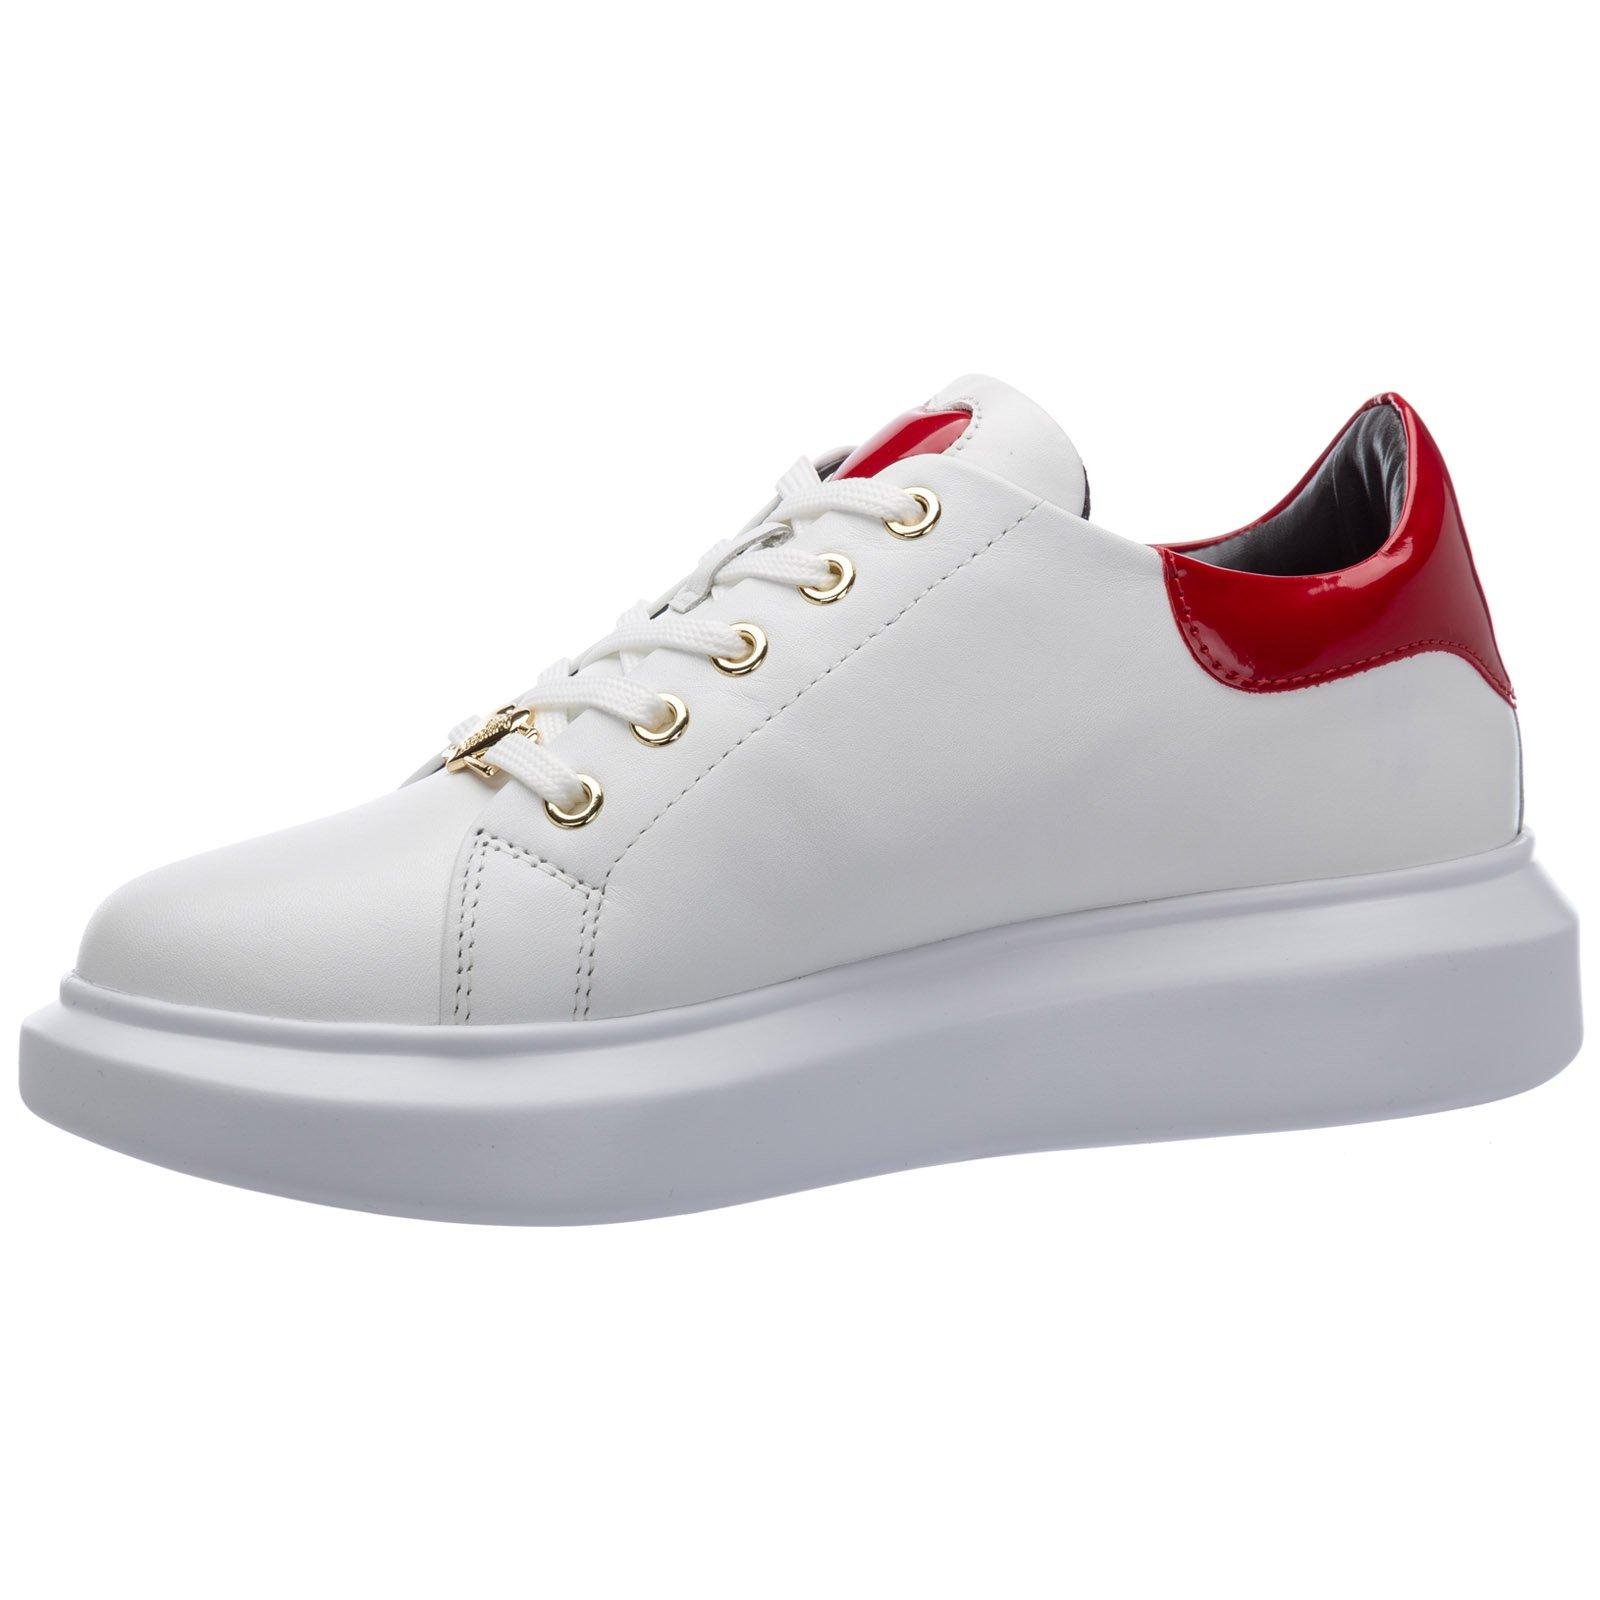 Love Moschino Leather Sequin Heart Detailed Sneakers in White - Lyst